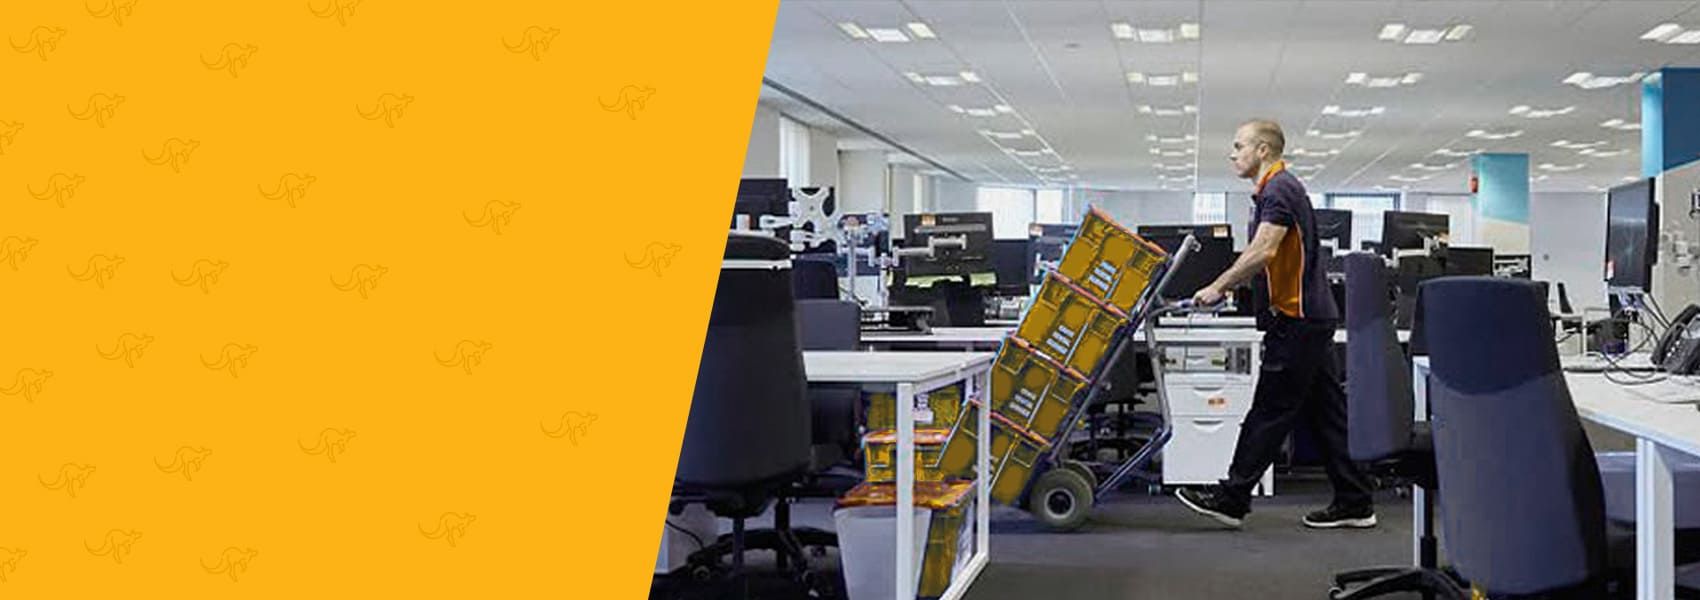 employee moves yellow boxes around the office